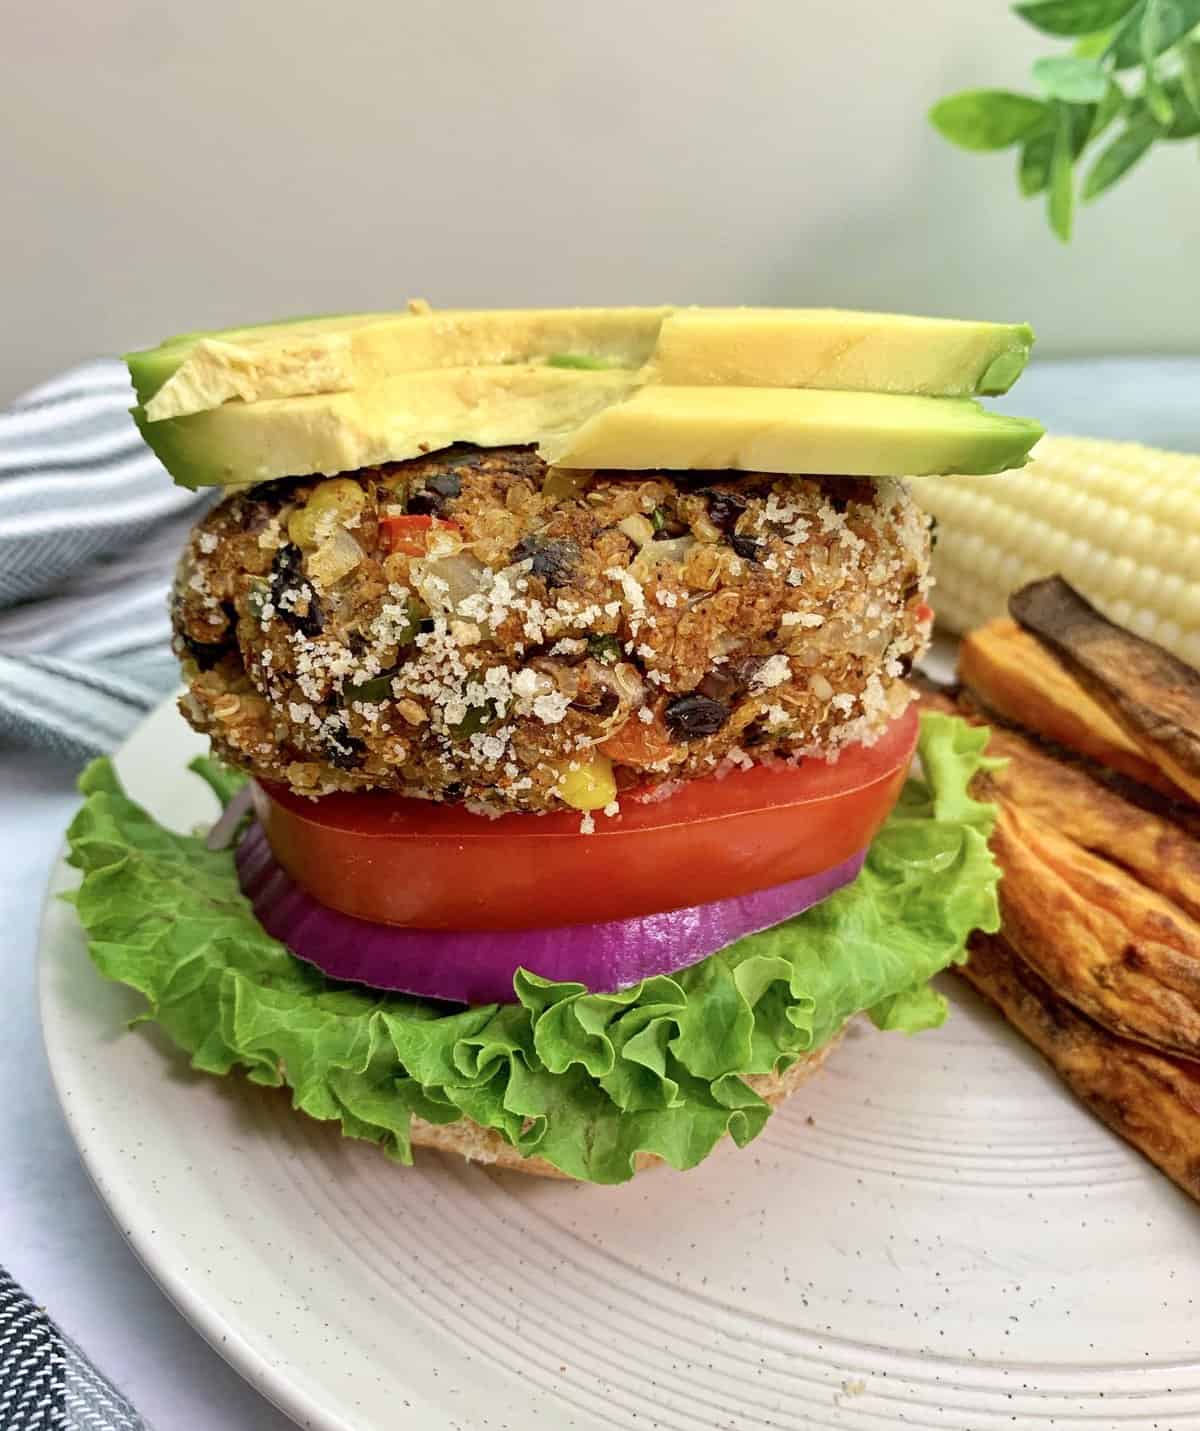  Get ready to wrangle some flavor with these Vegan Cowboy Burgers!